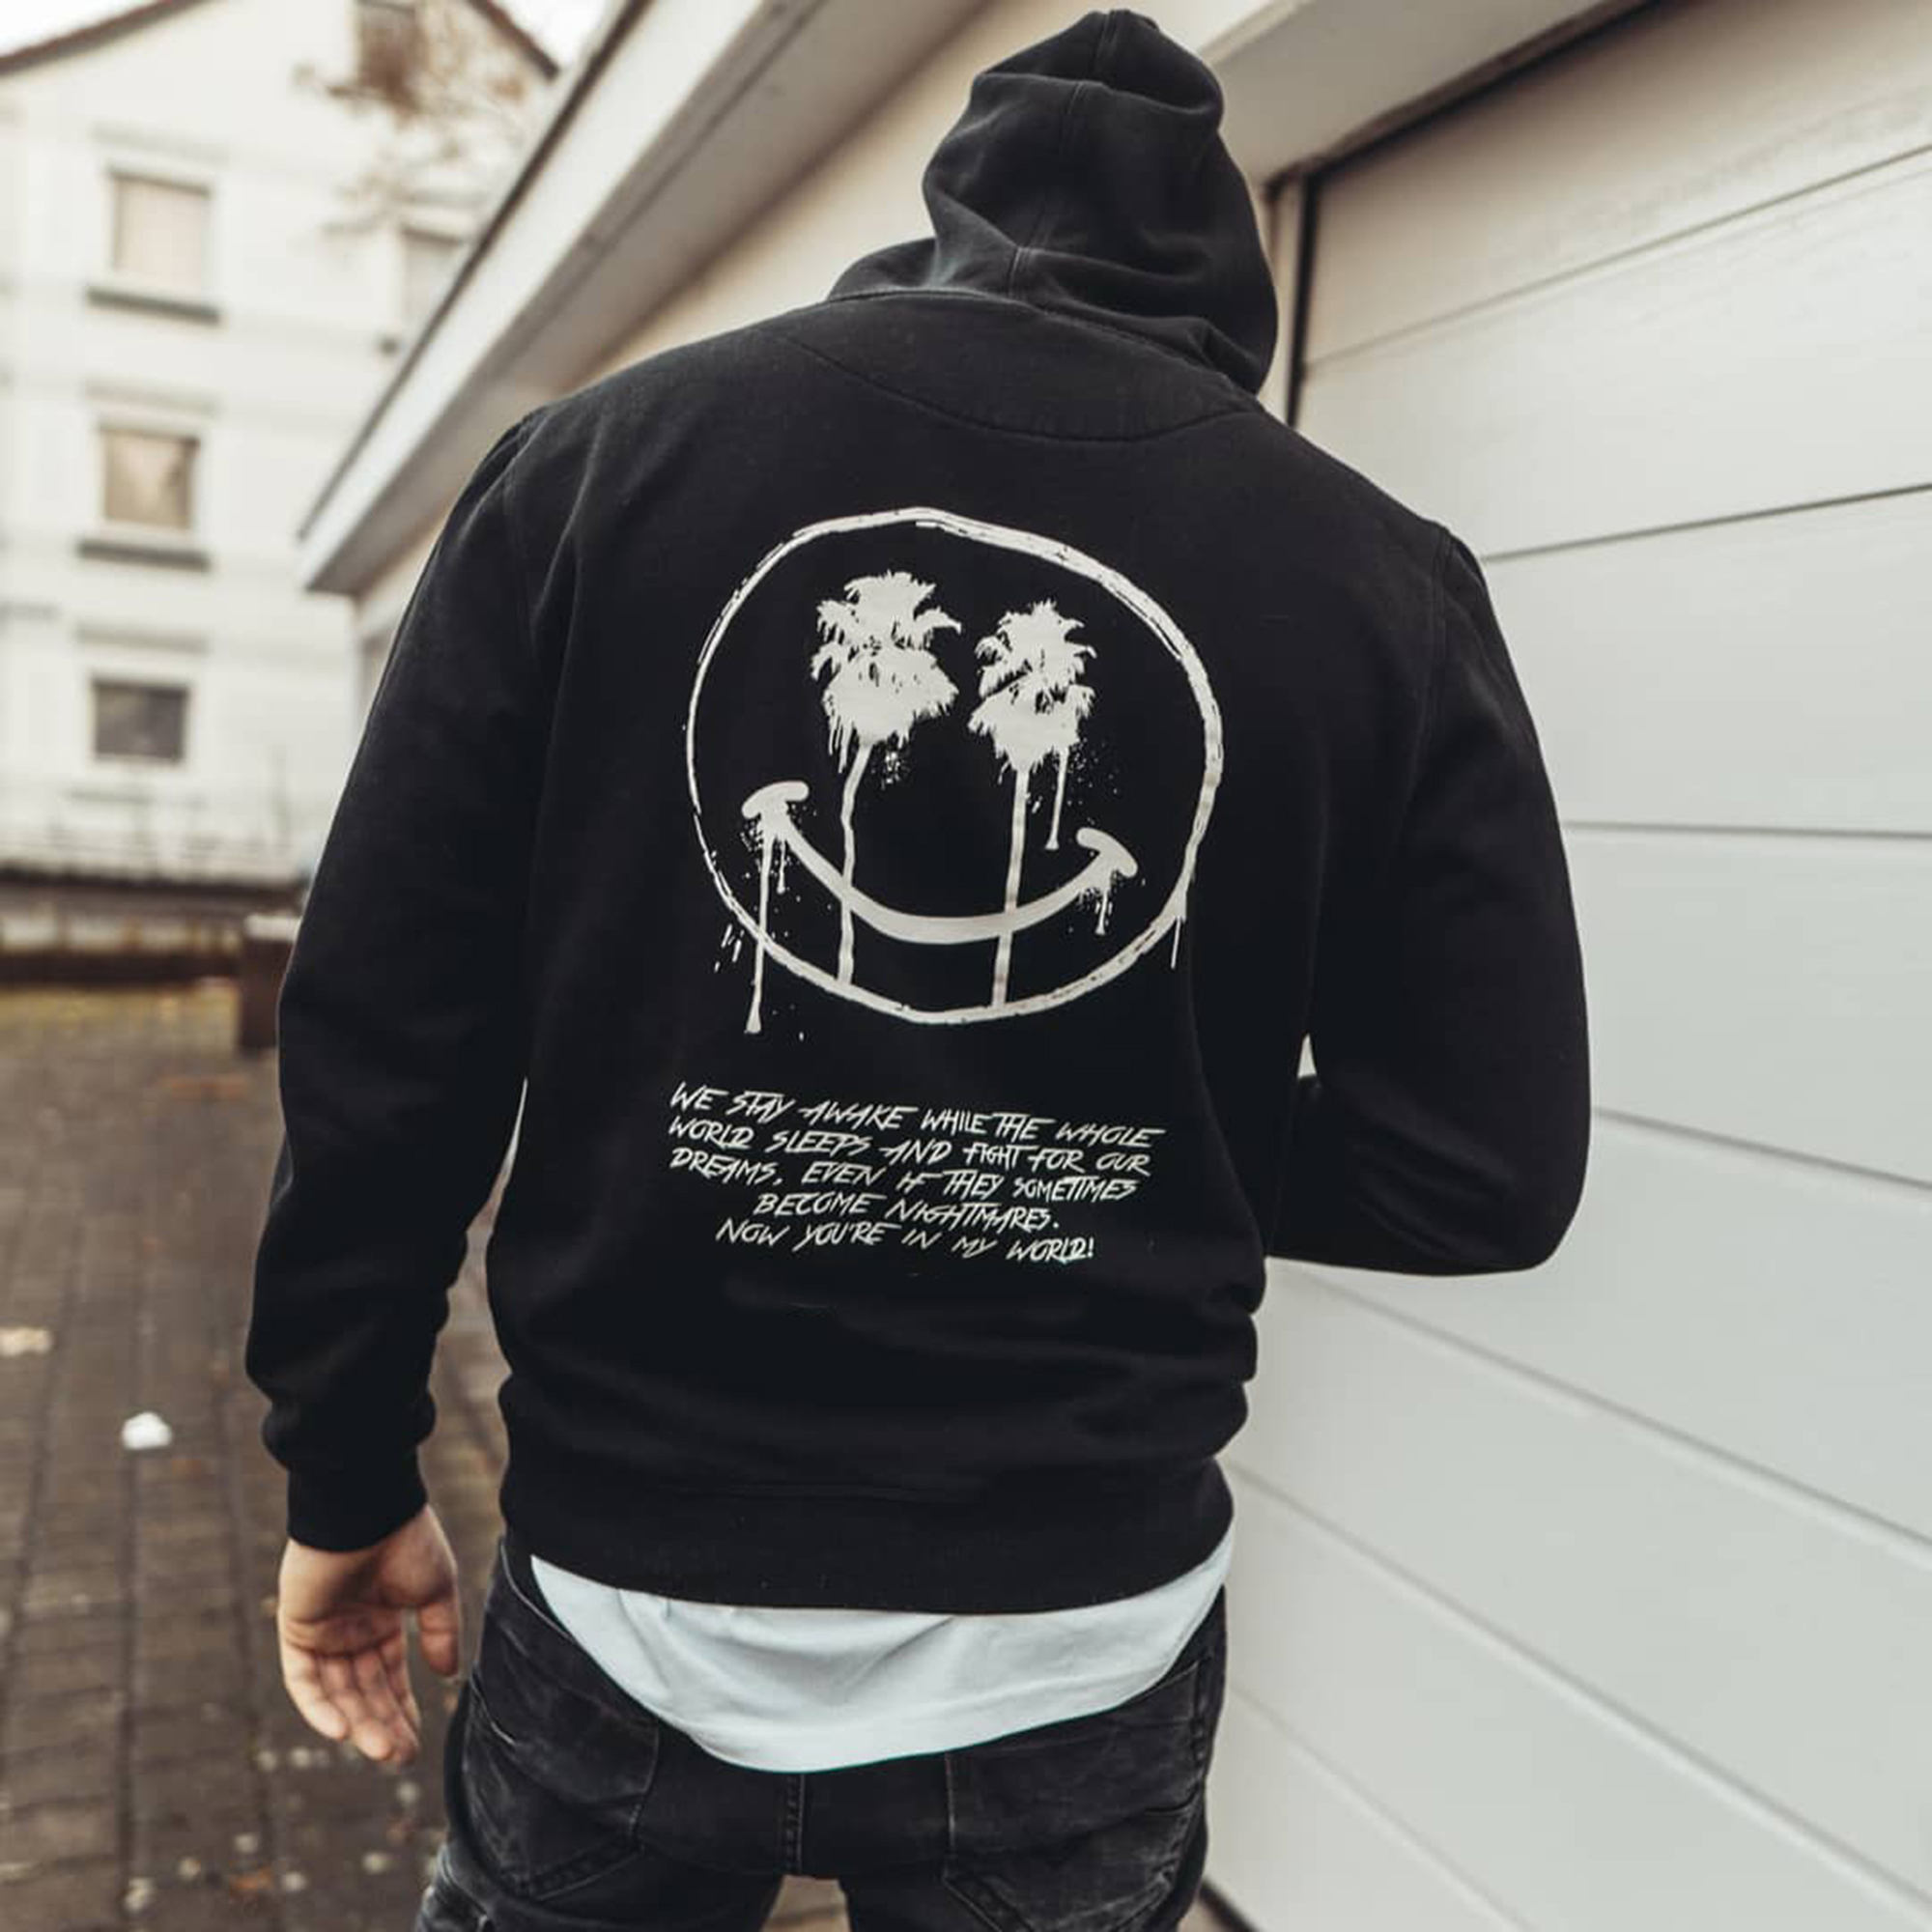 Cloeinc Stay Awake And Fight For Our Dreams Printed Men's Hoodie